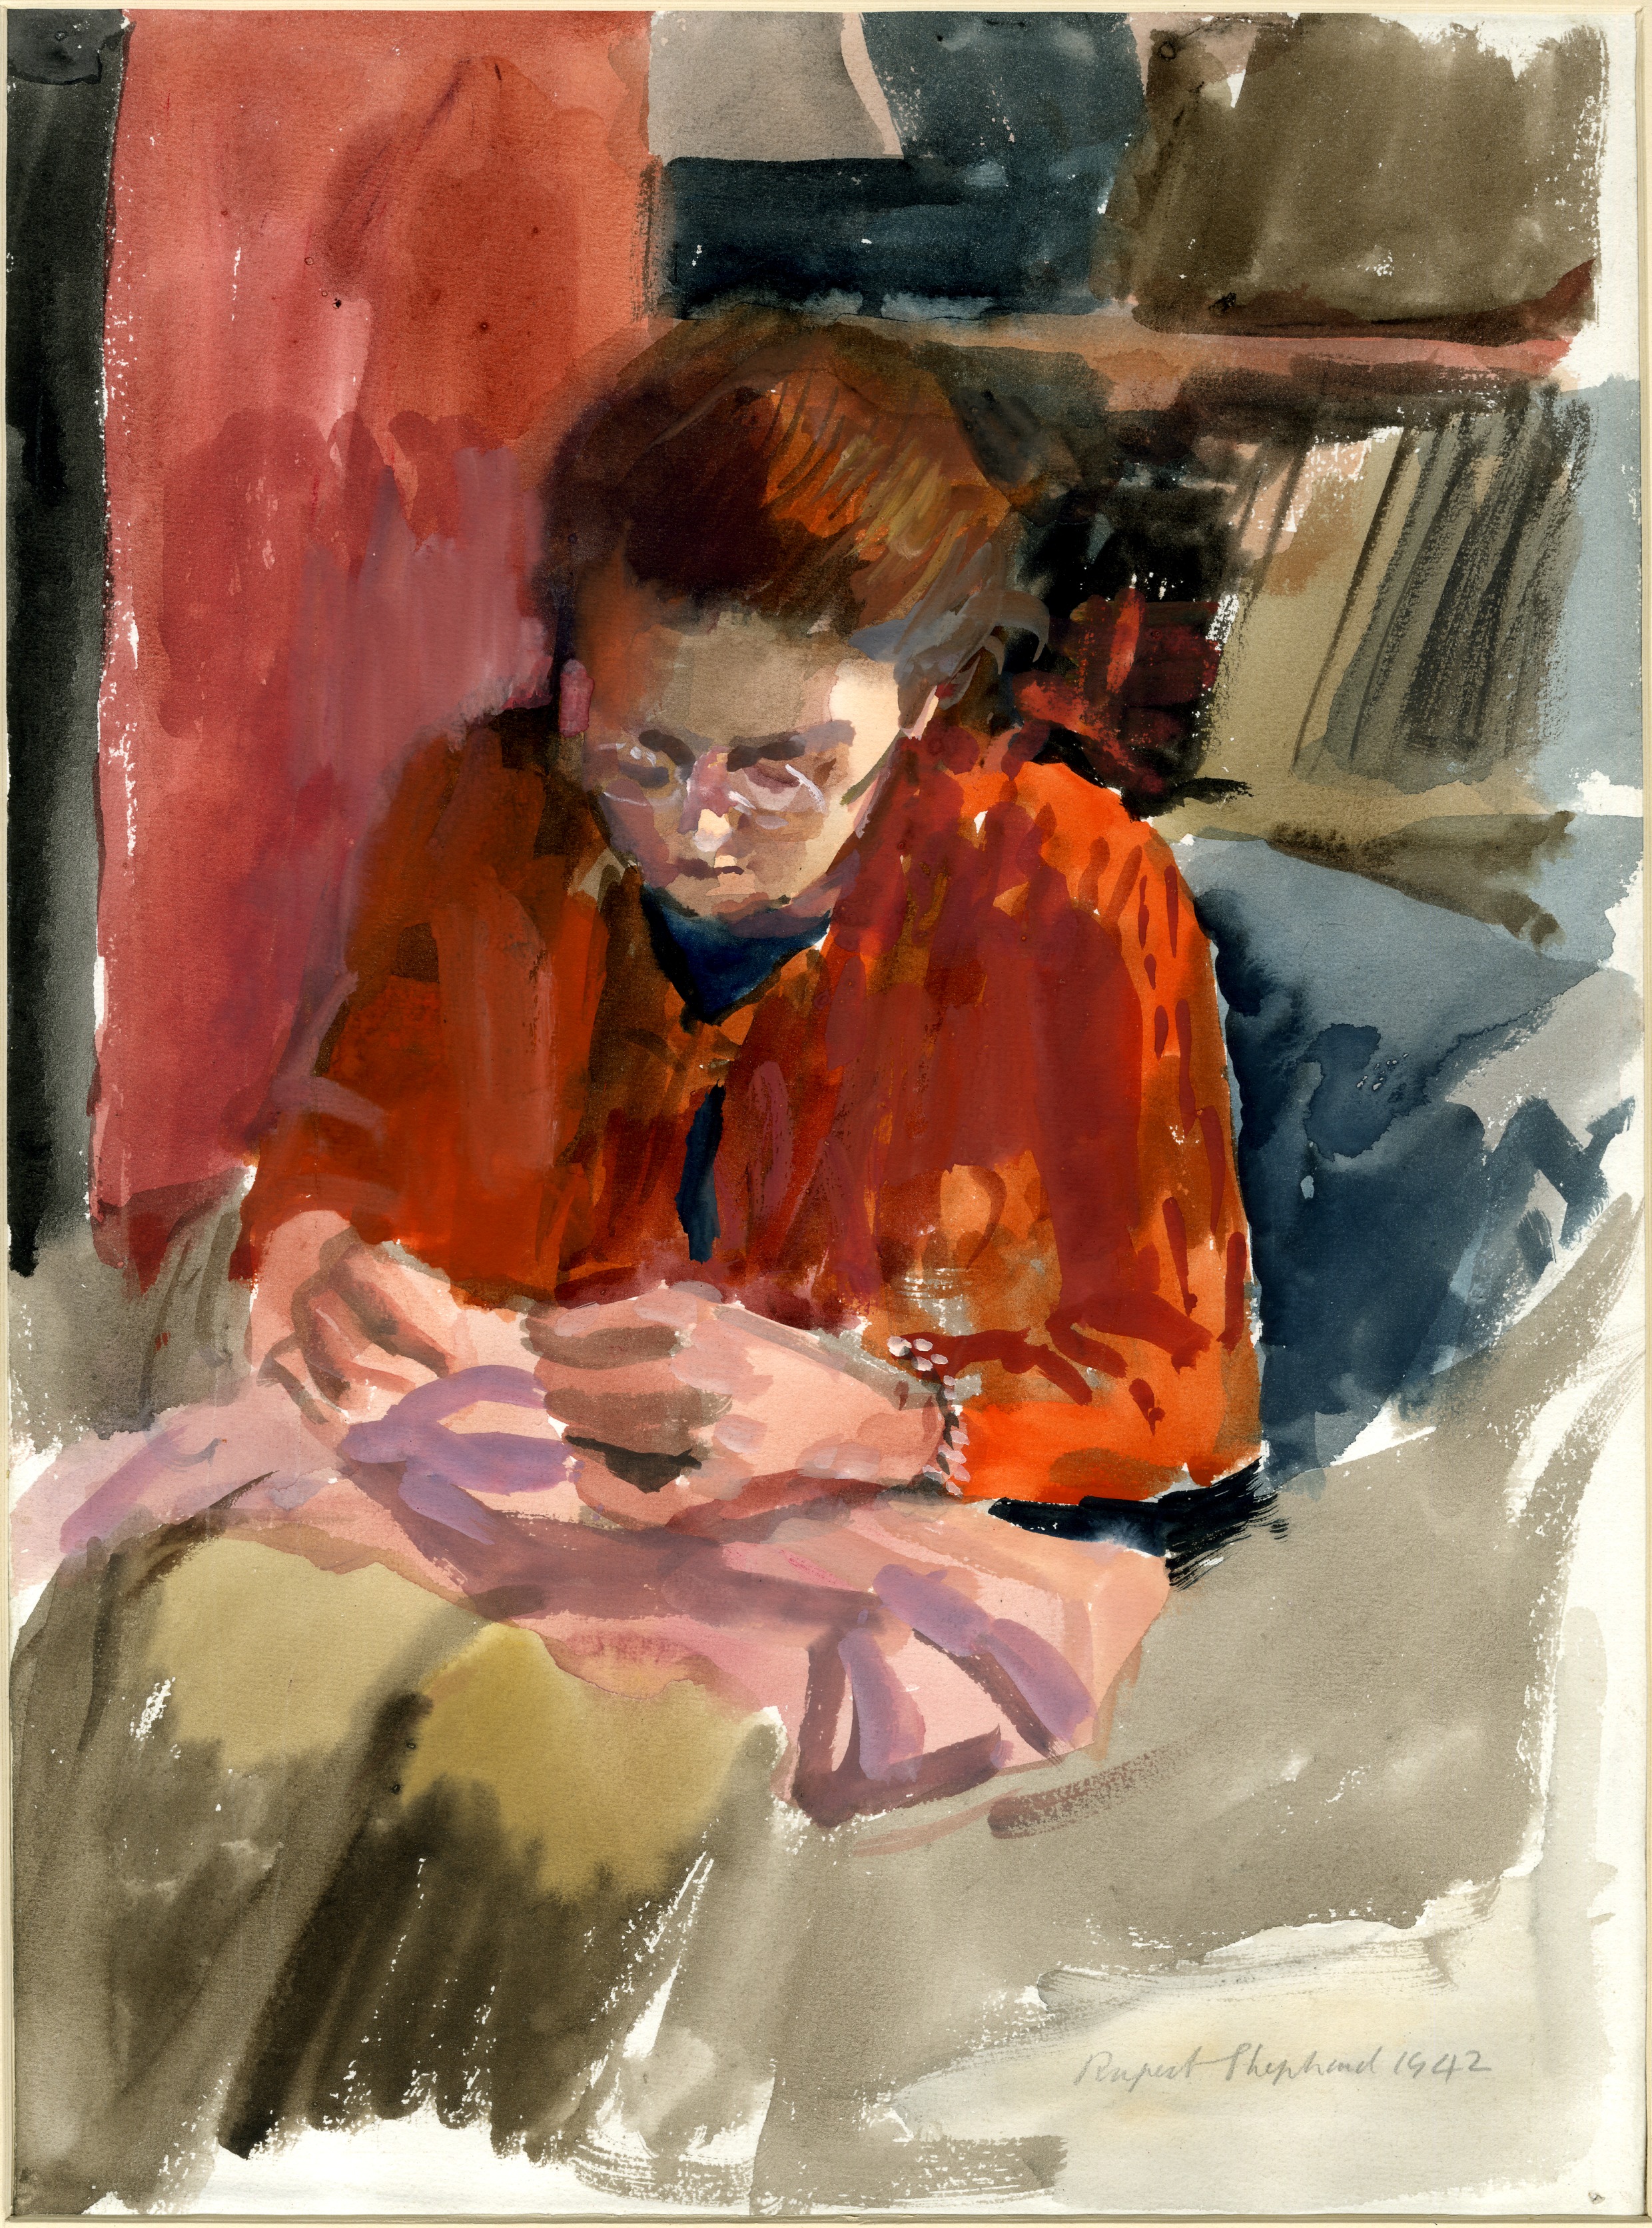 Woman sewing (1942)